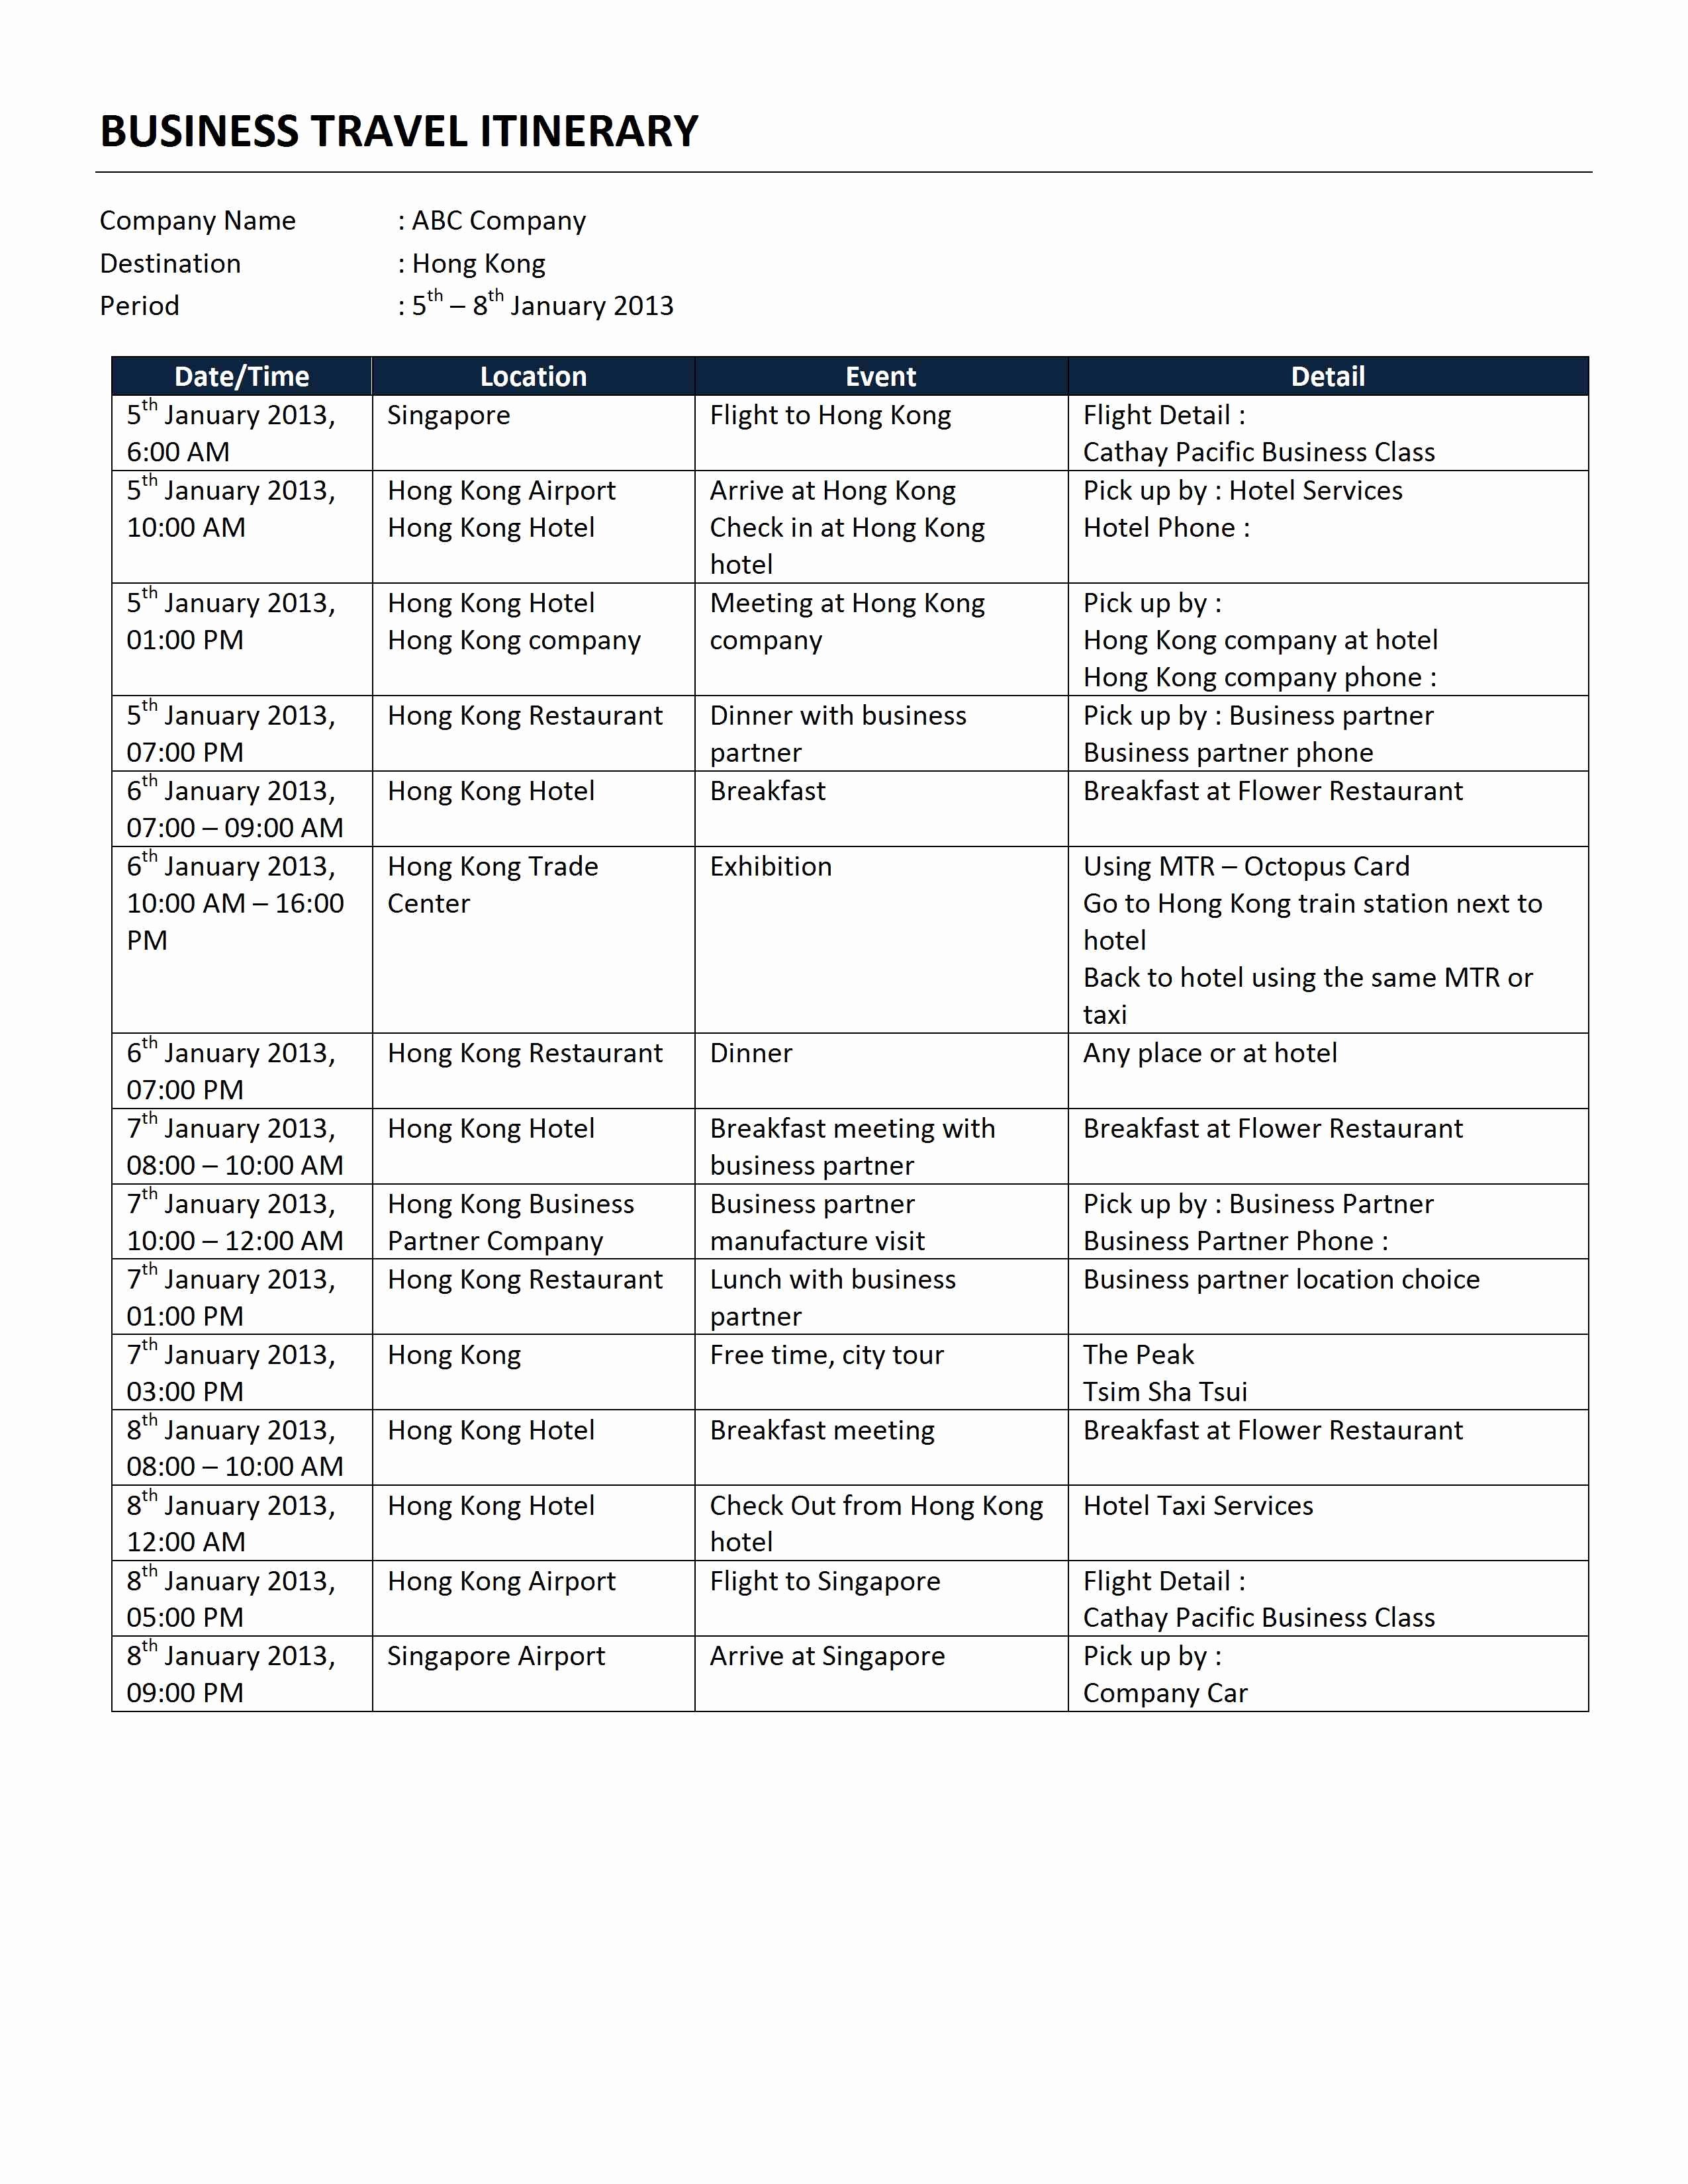 Travel Itinerary Template Word 2010 New Business Travel Itinerary Template